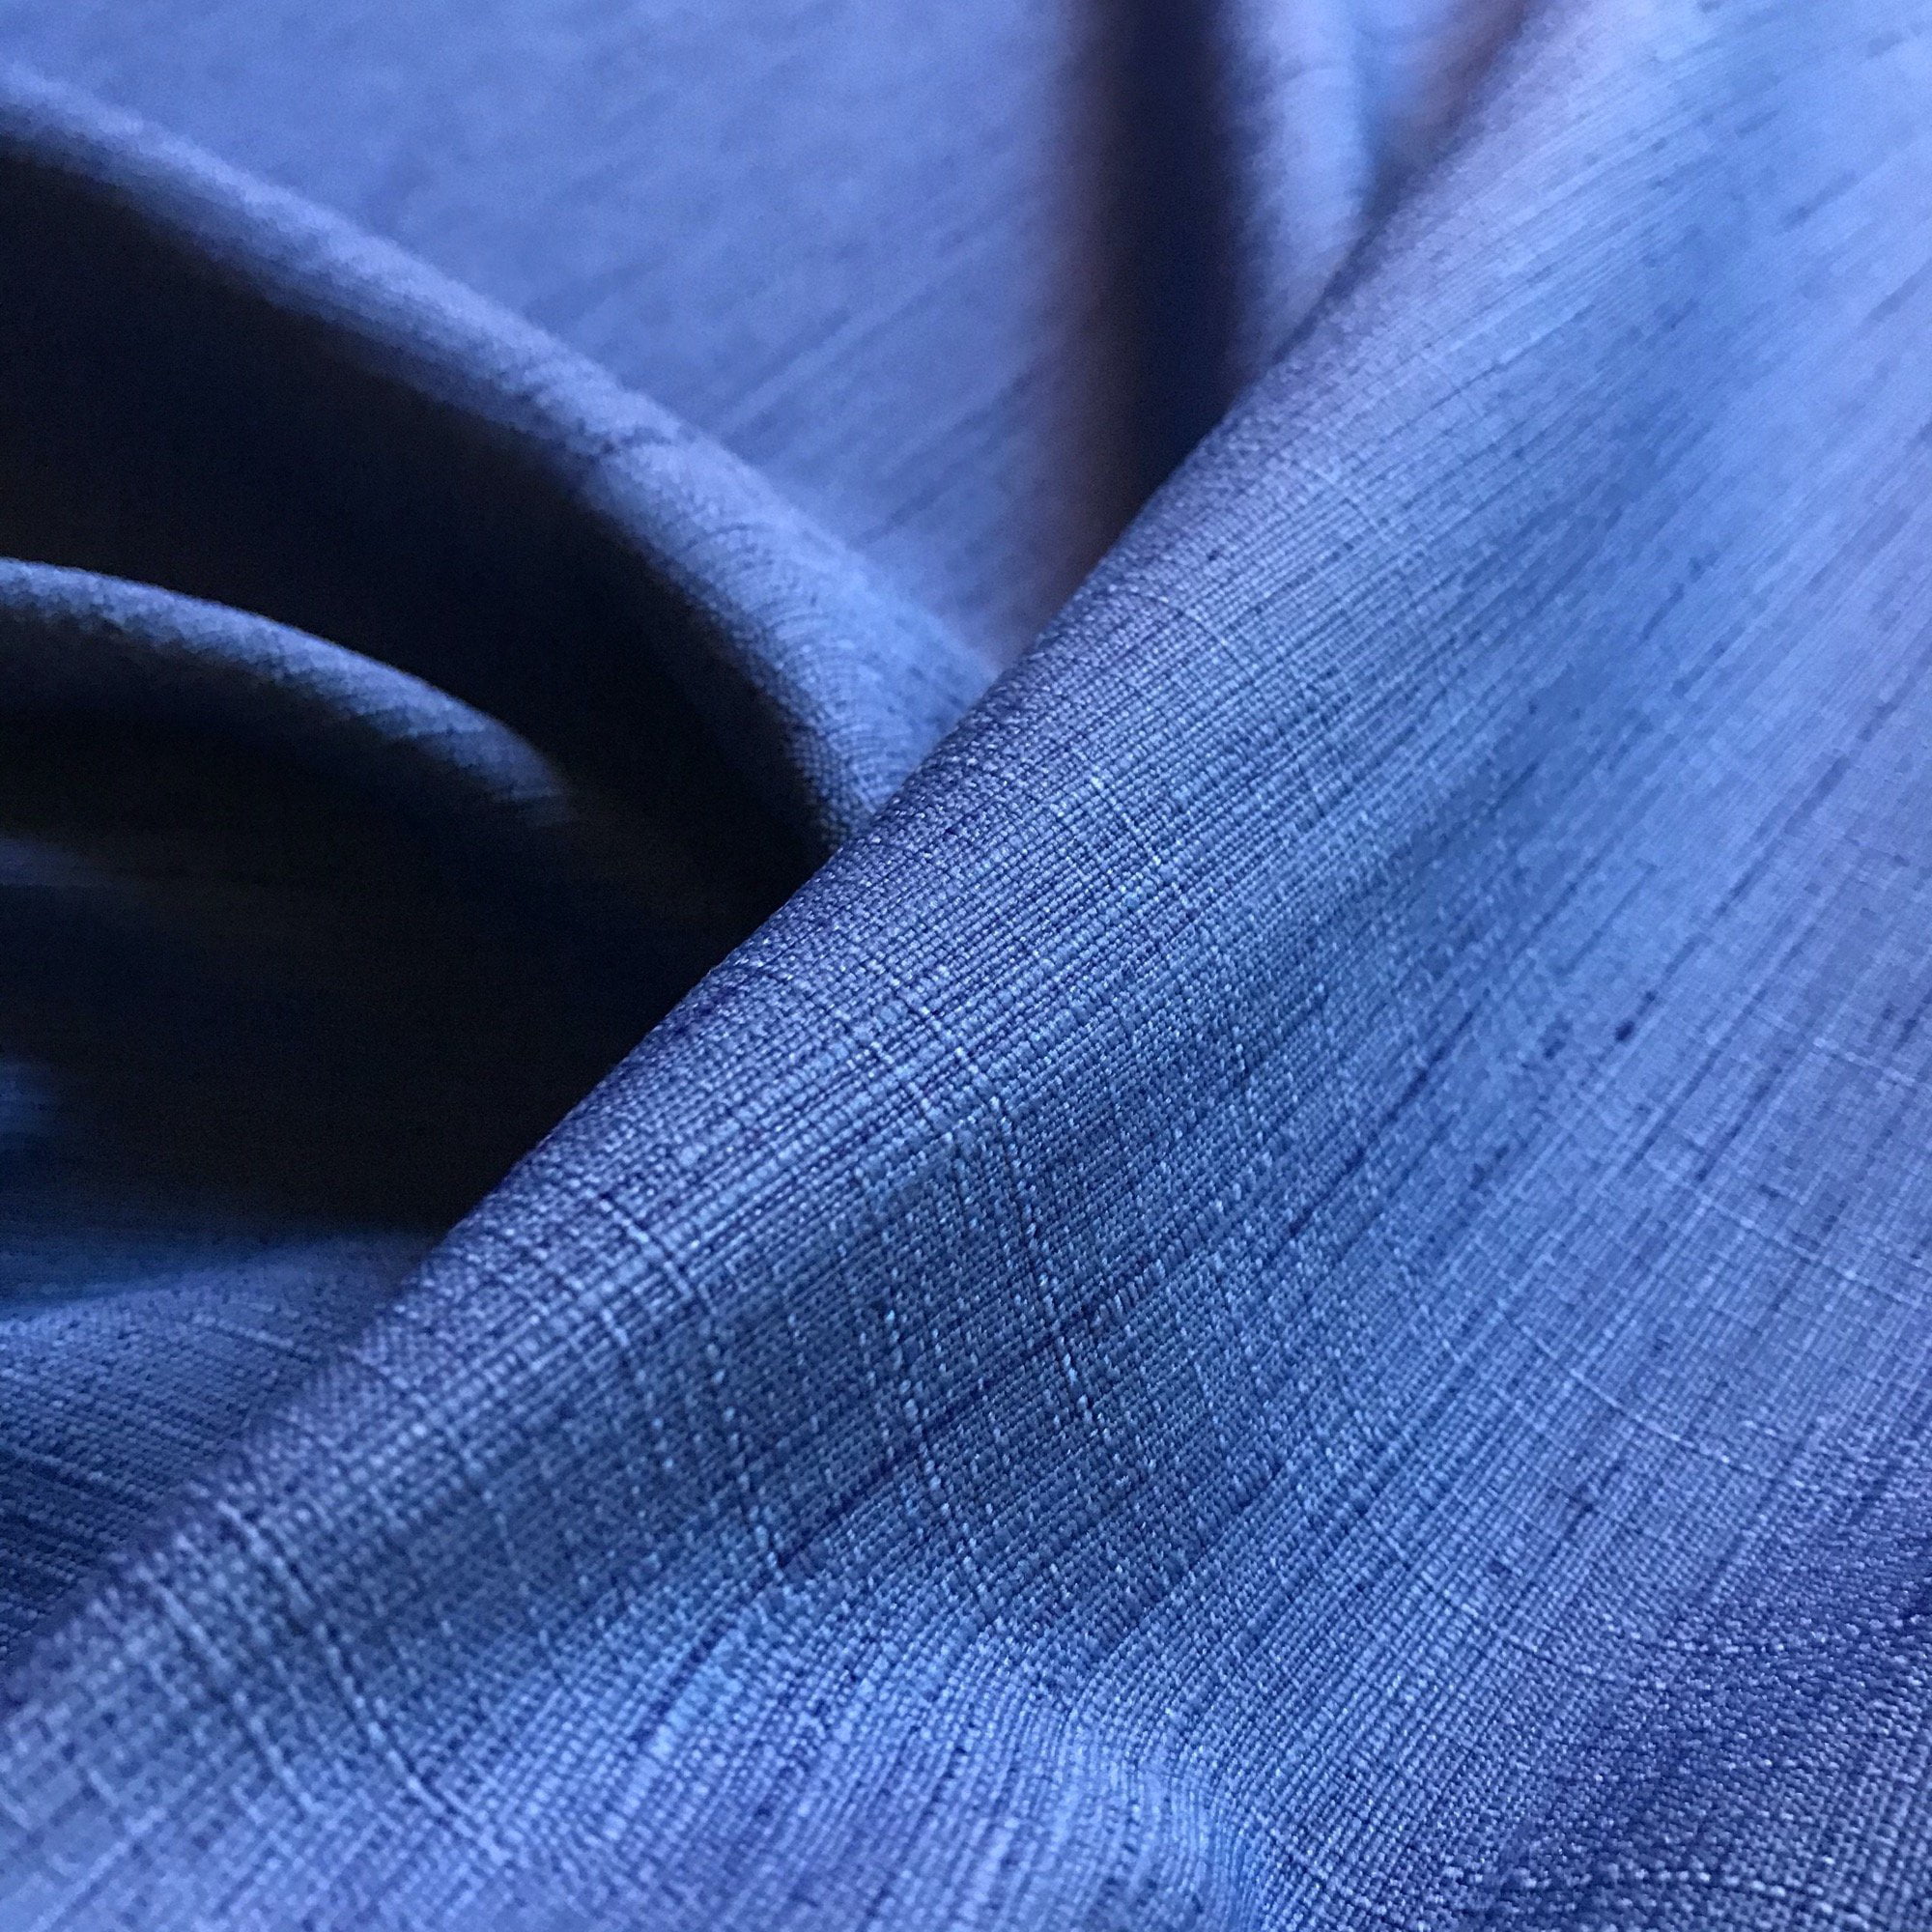 Spa Blue Shantung Silk Solid Upholstery Fabric 54